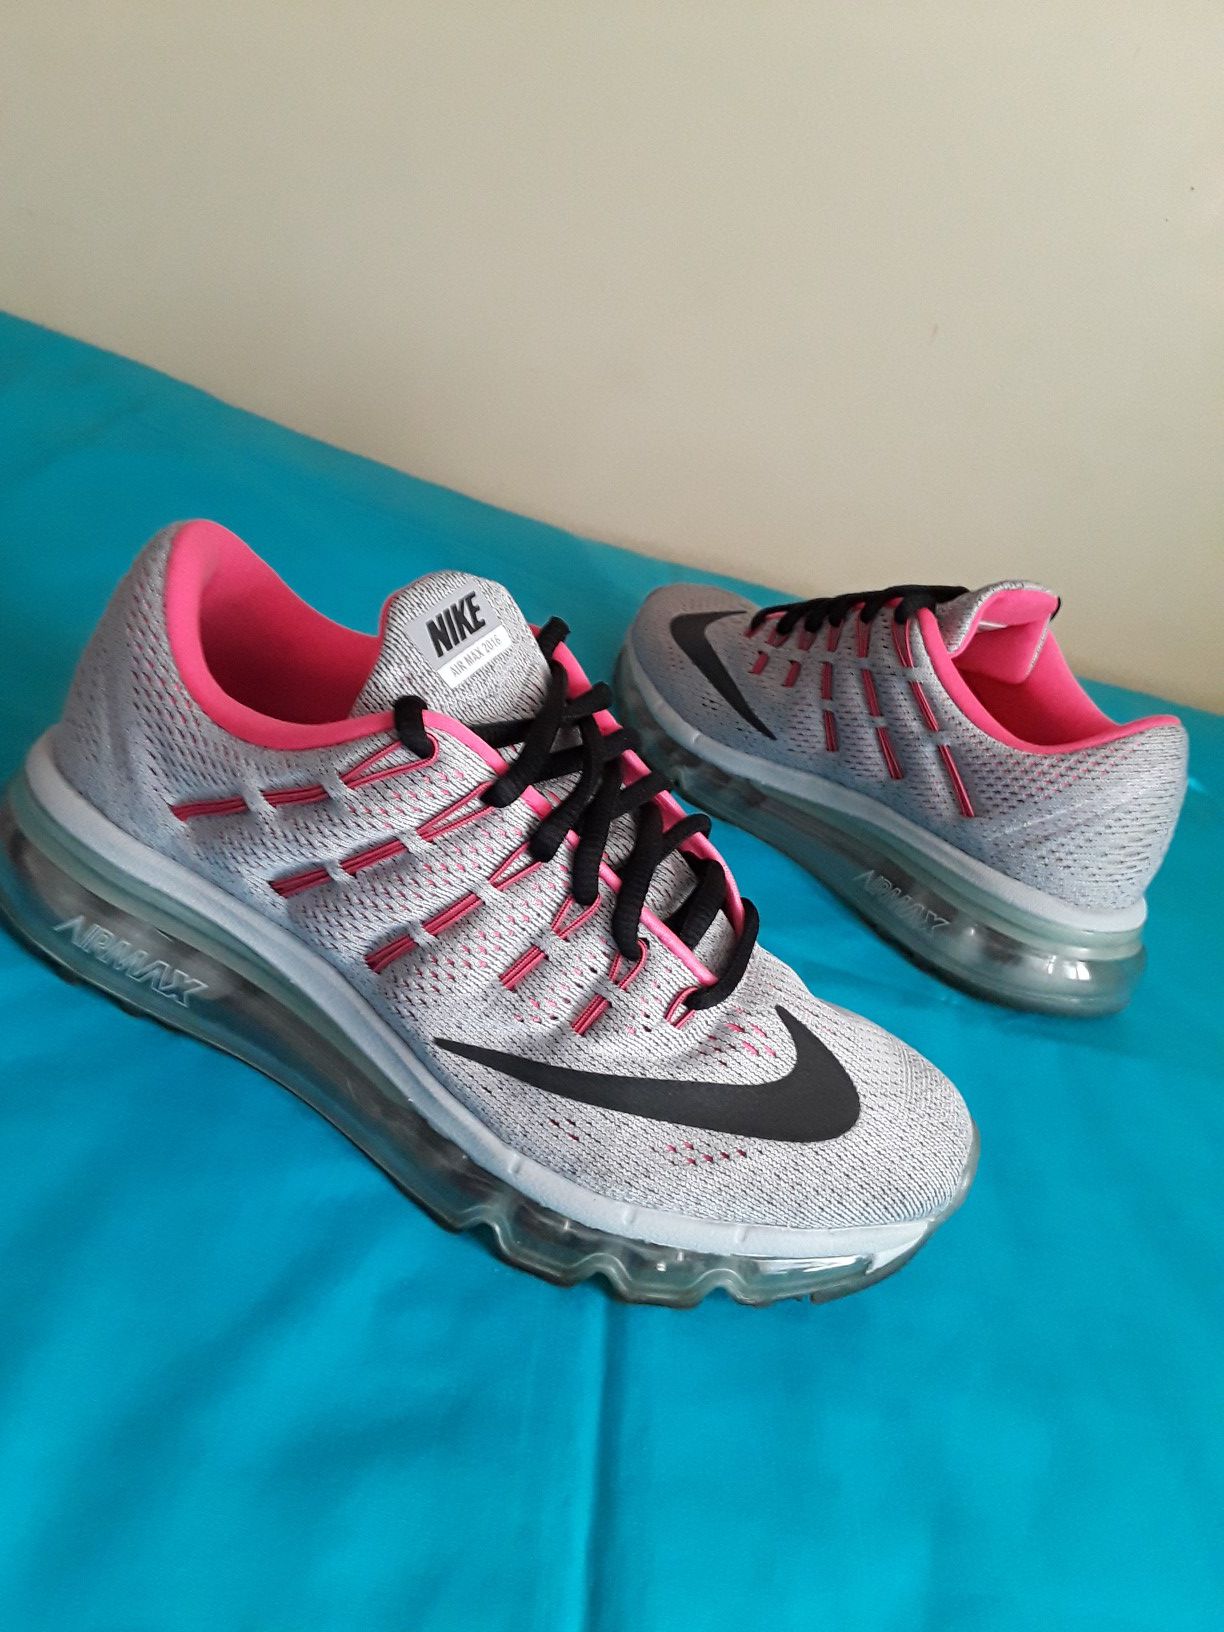 Nike Air Max 2016 Grey Hyper Pink Size 6 WOMEN and Size 4.5Y